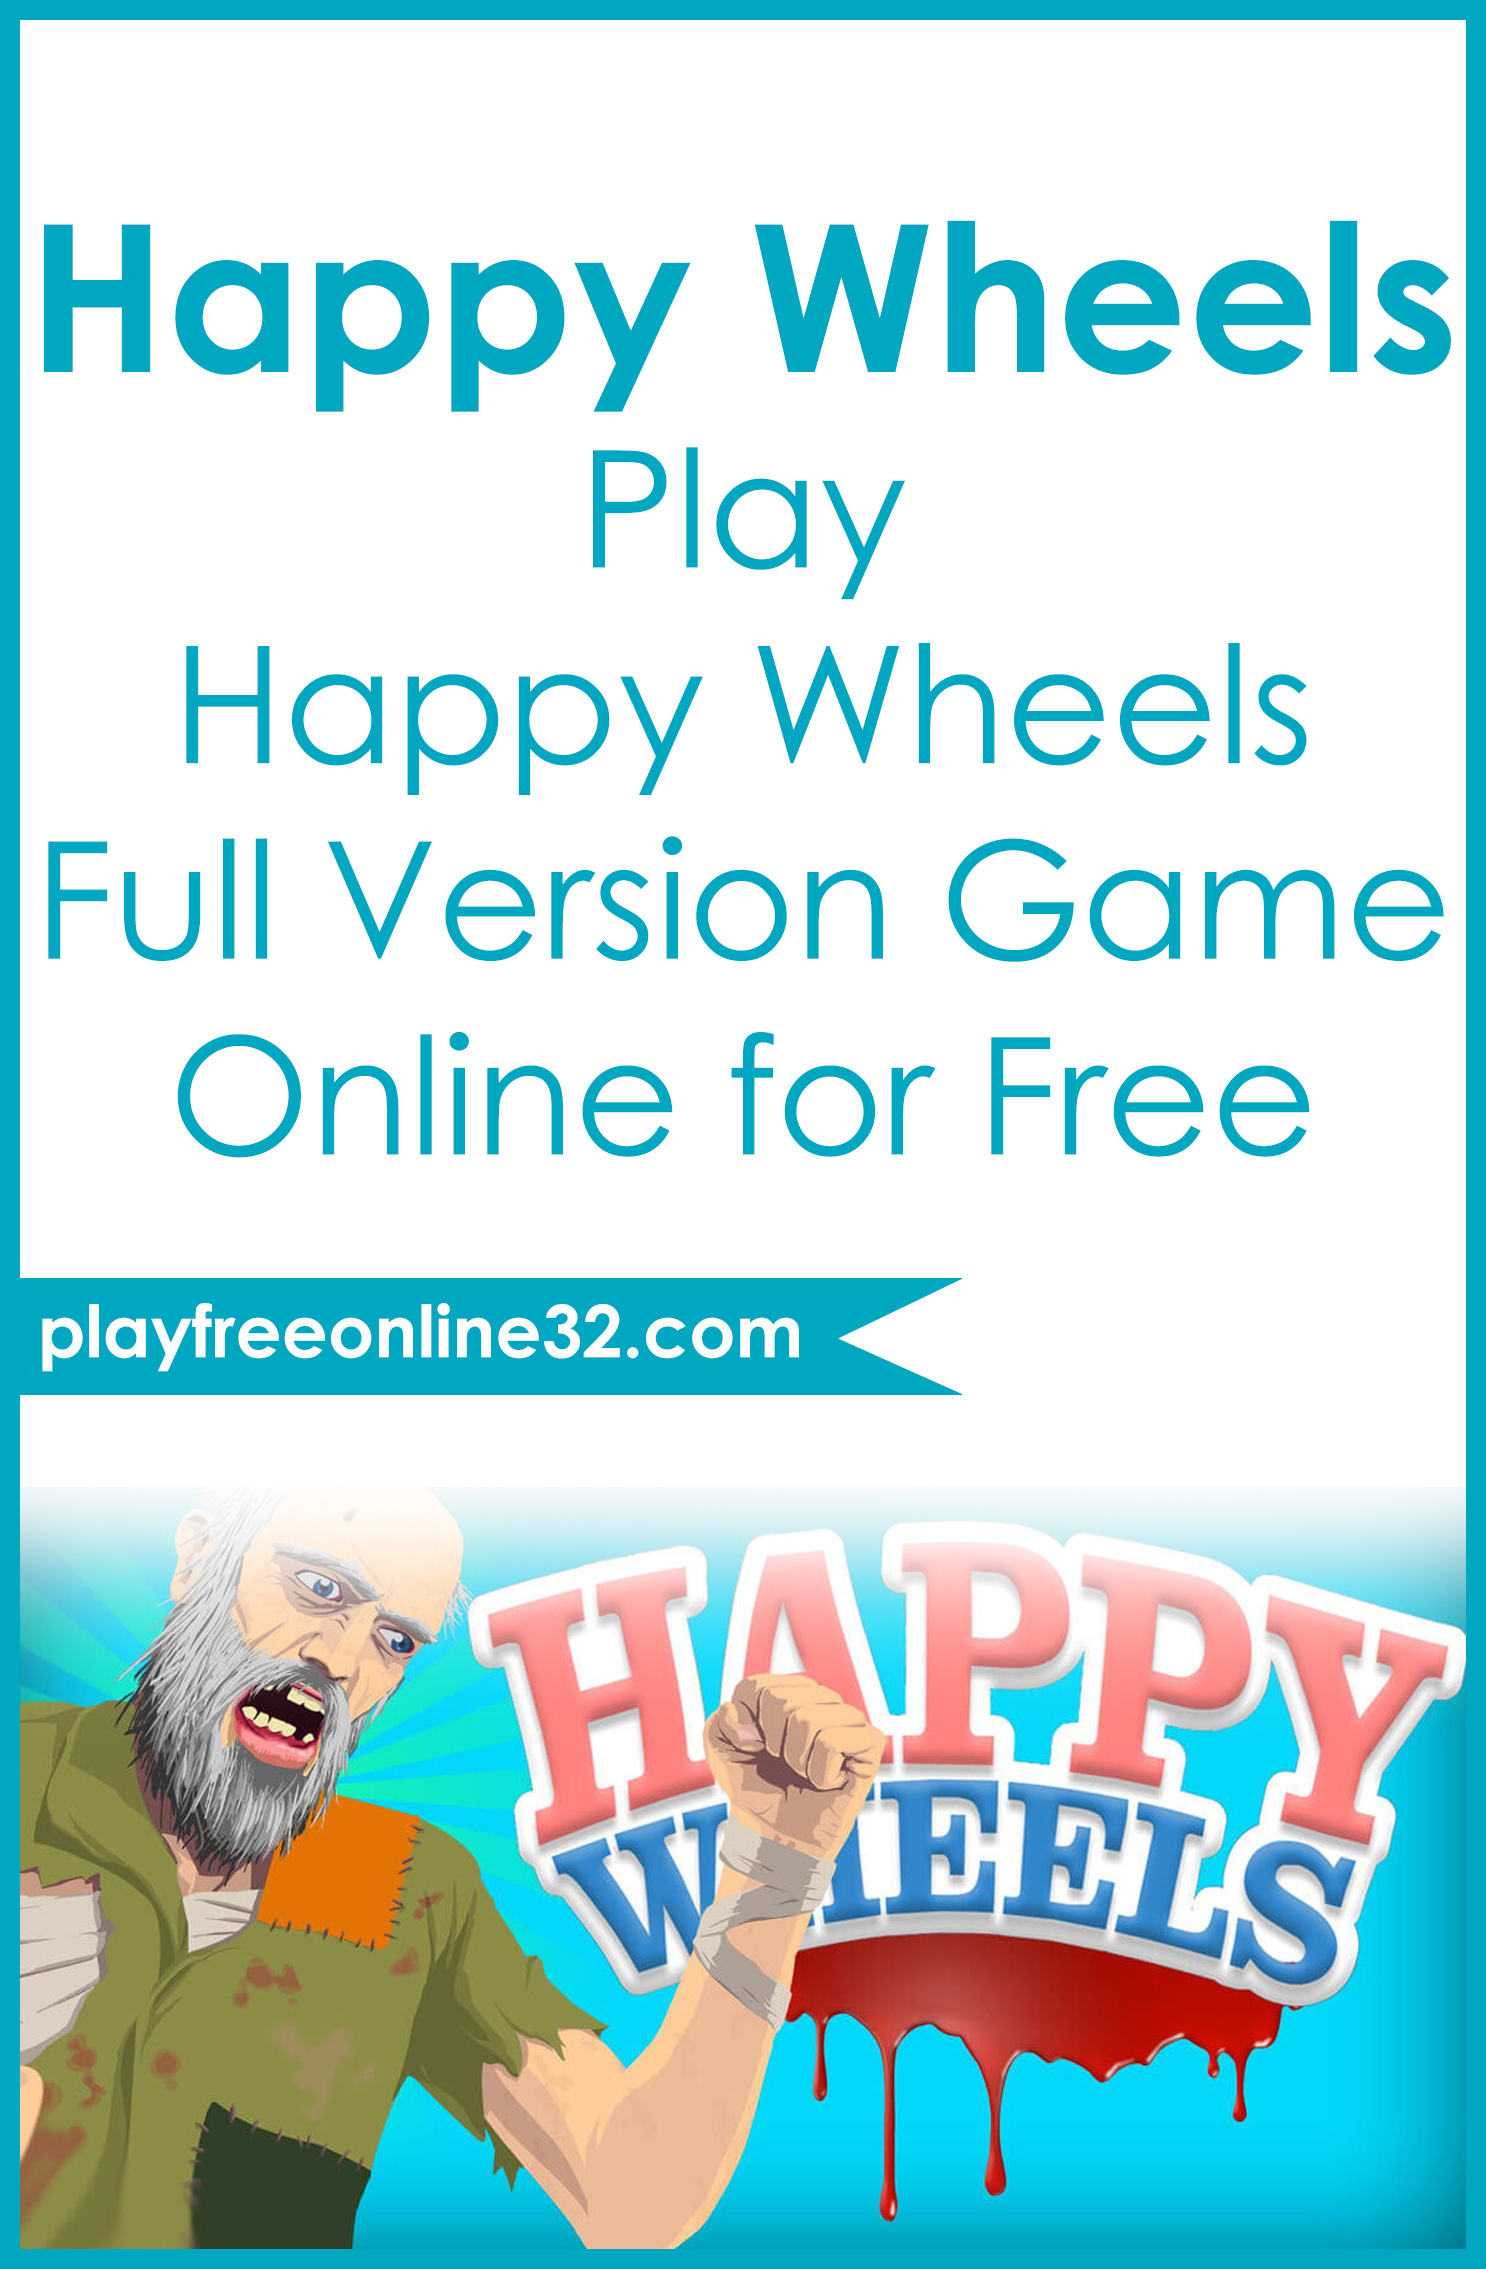 Happy Wheels • Play Happy Wheels Full Version Game Online for Free Pinterest